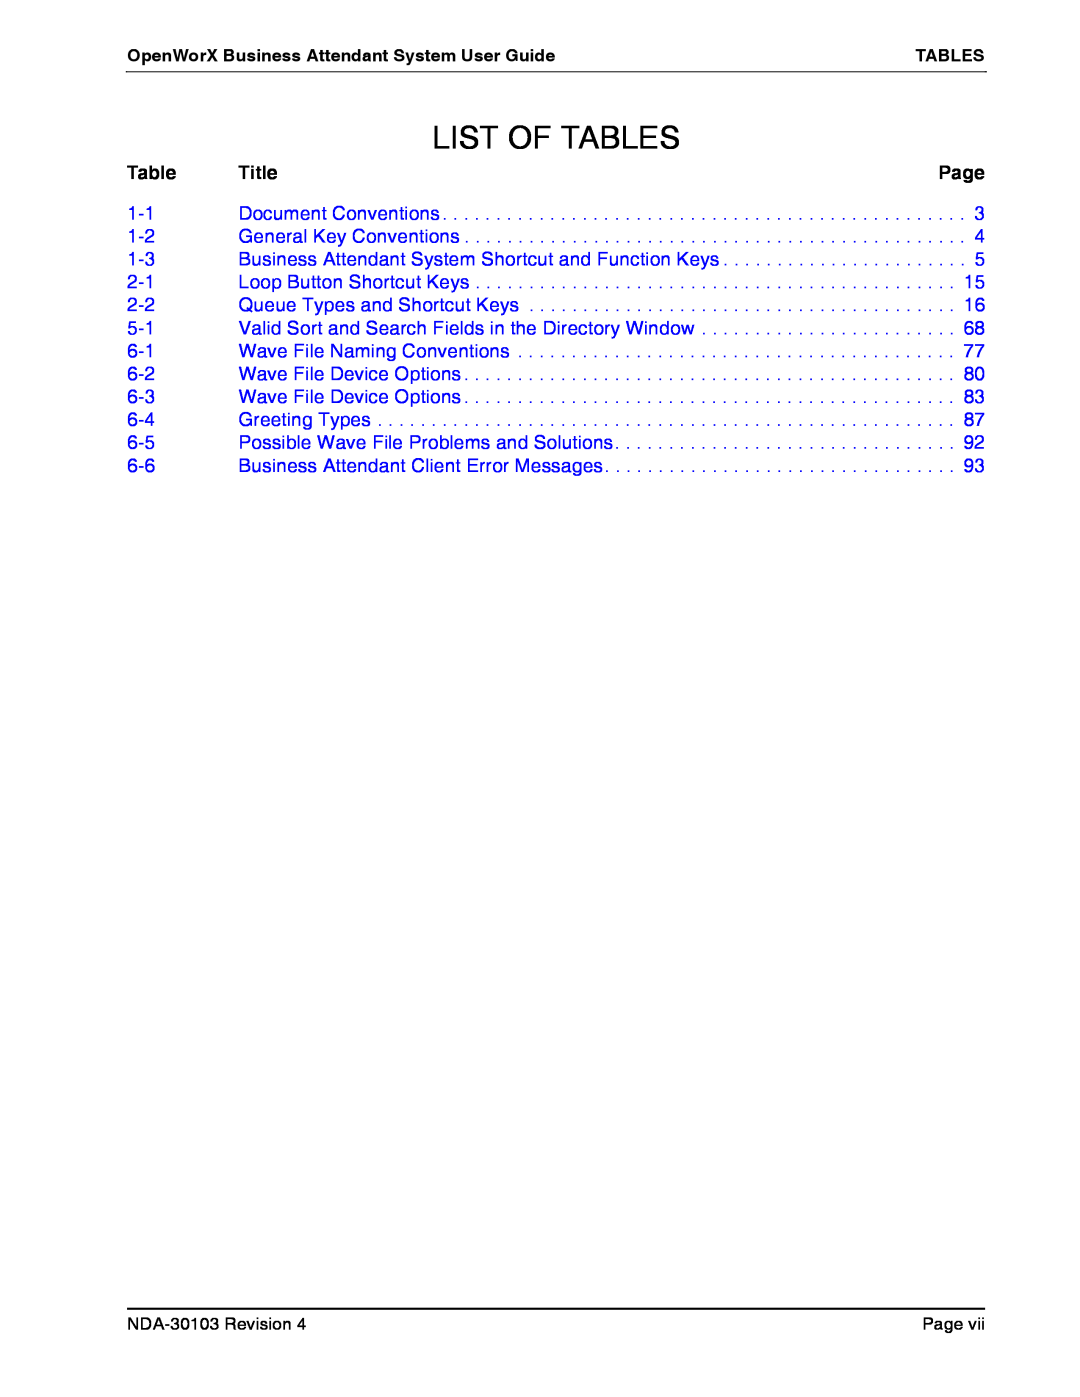 NEC NDA-30103-004 manual List Of Tables, Title 